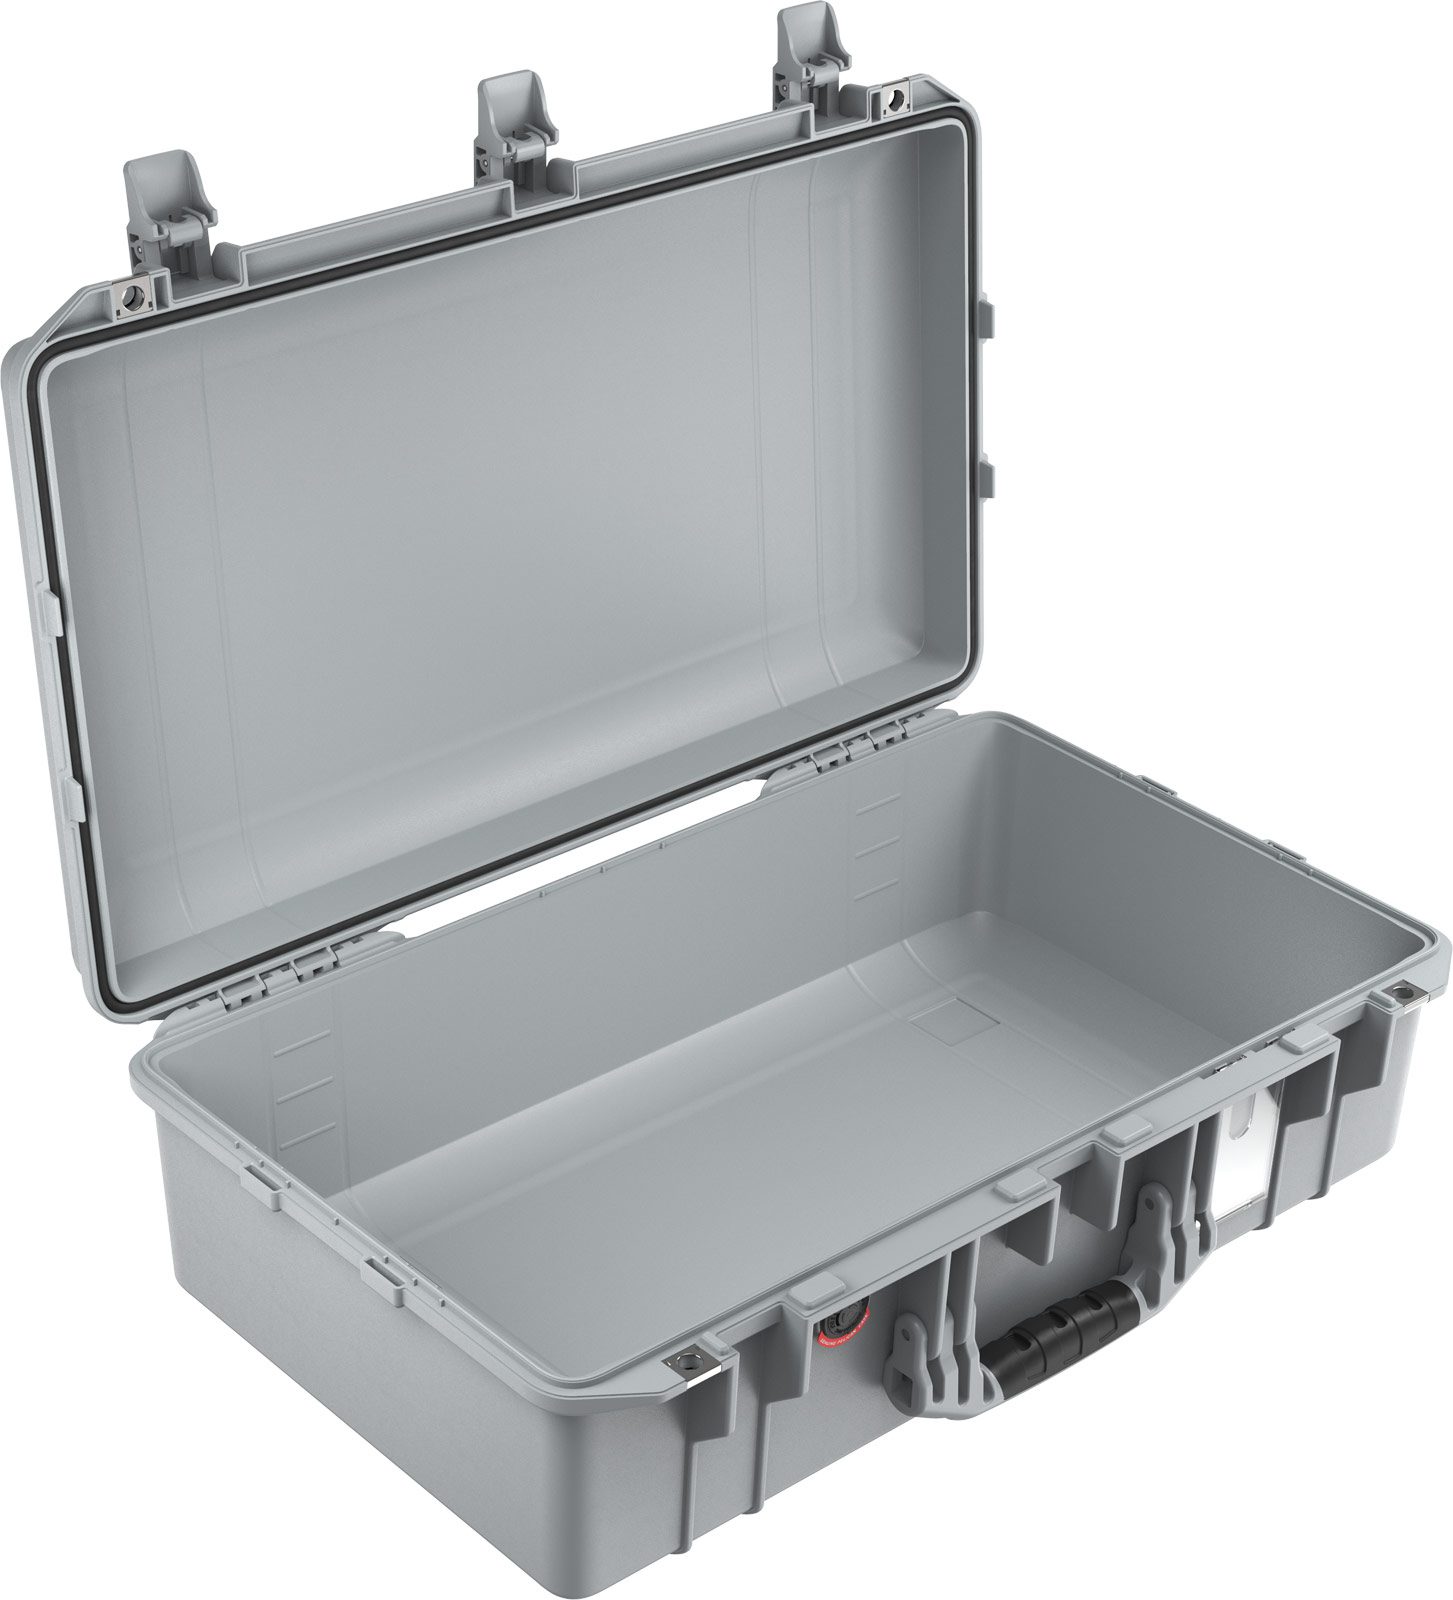 Pelican Products 1555 Air Case - Silver, Black Liner